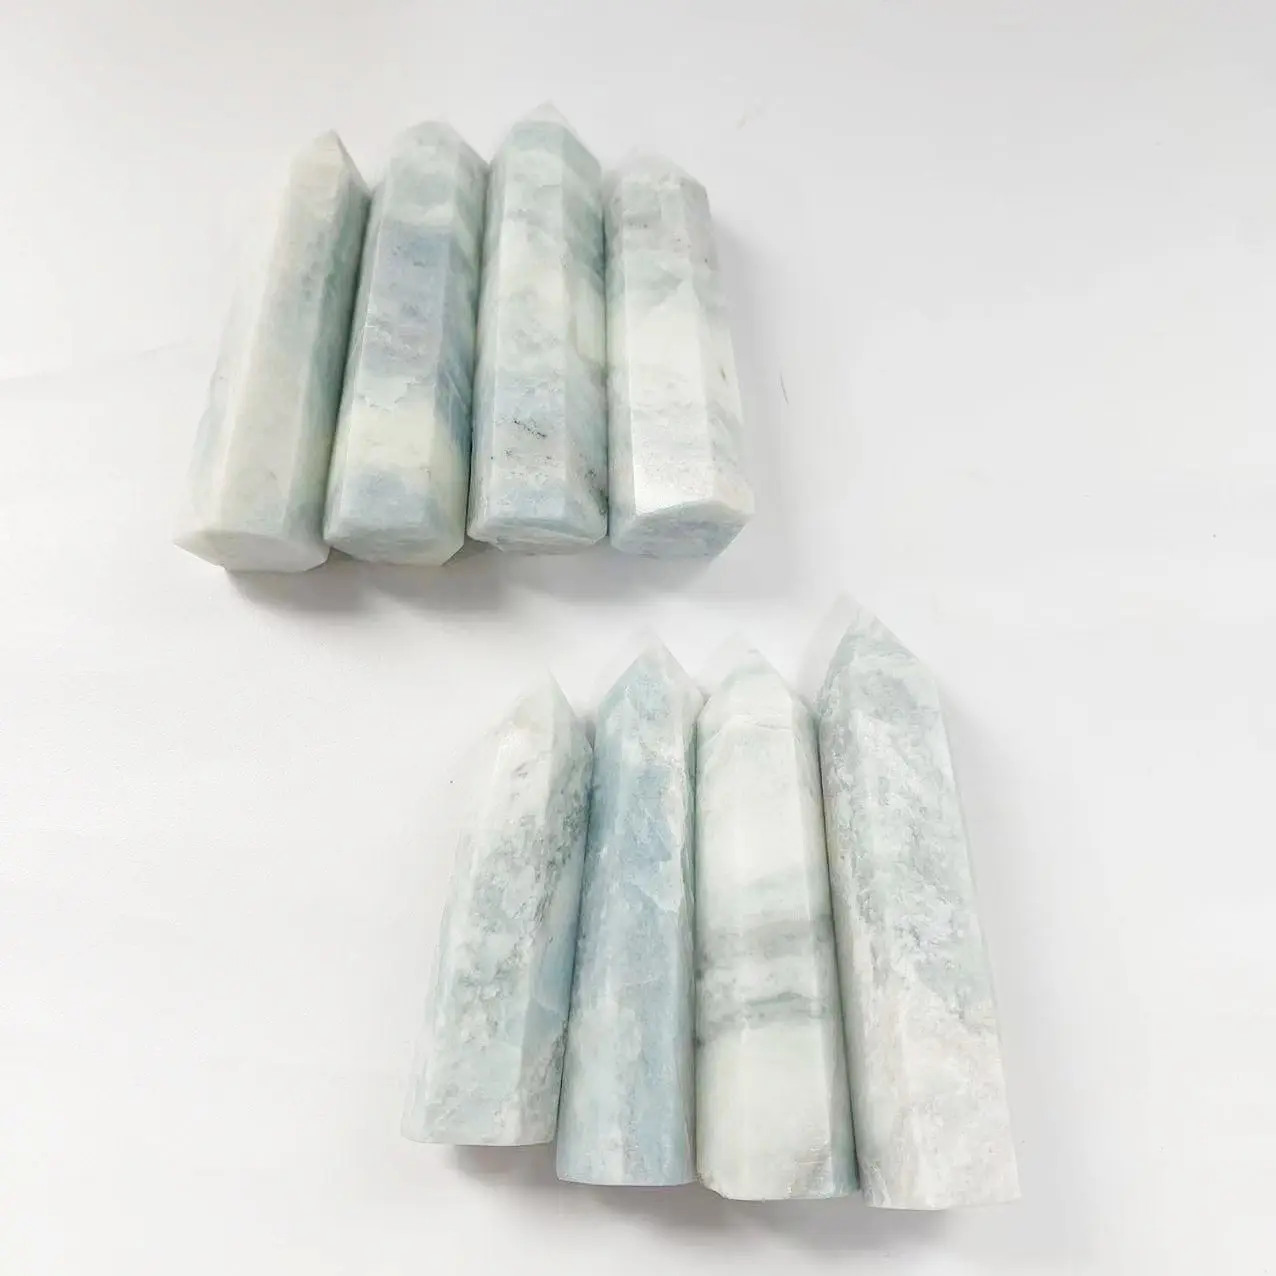 Hot Sale Wholesale Healing Crystals Stones Wands Tower Customized Polishing Aramid Pattern Points Crafts For Decoration